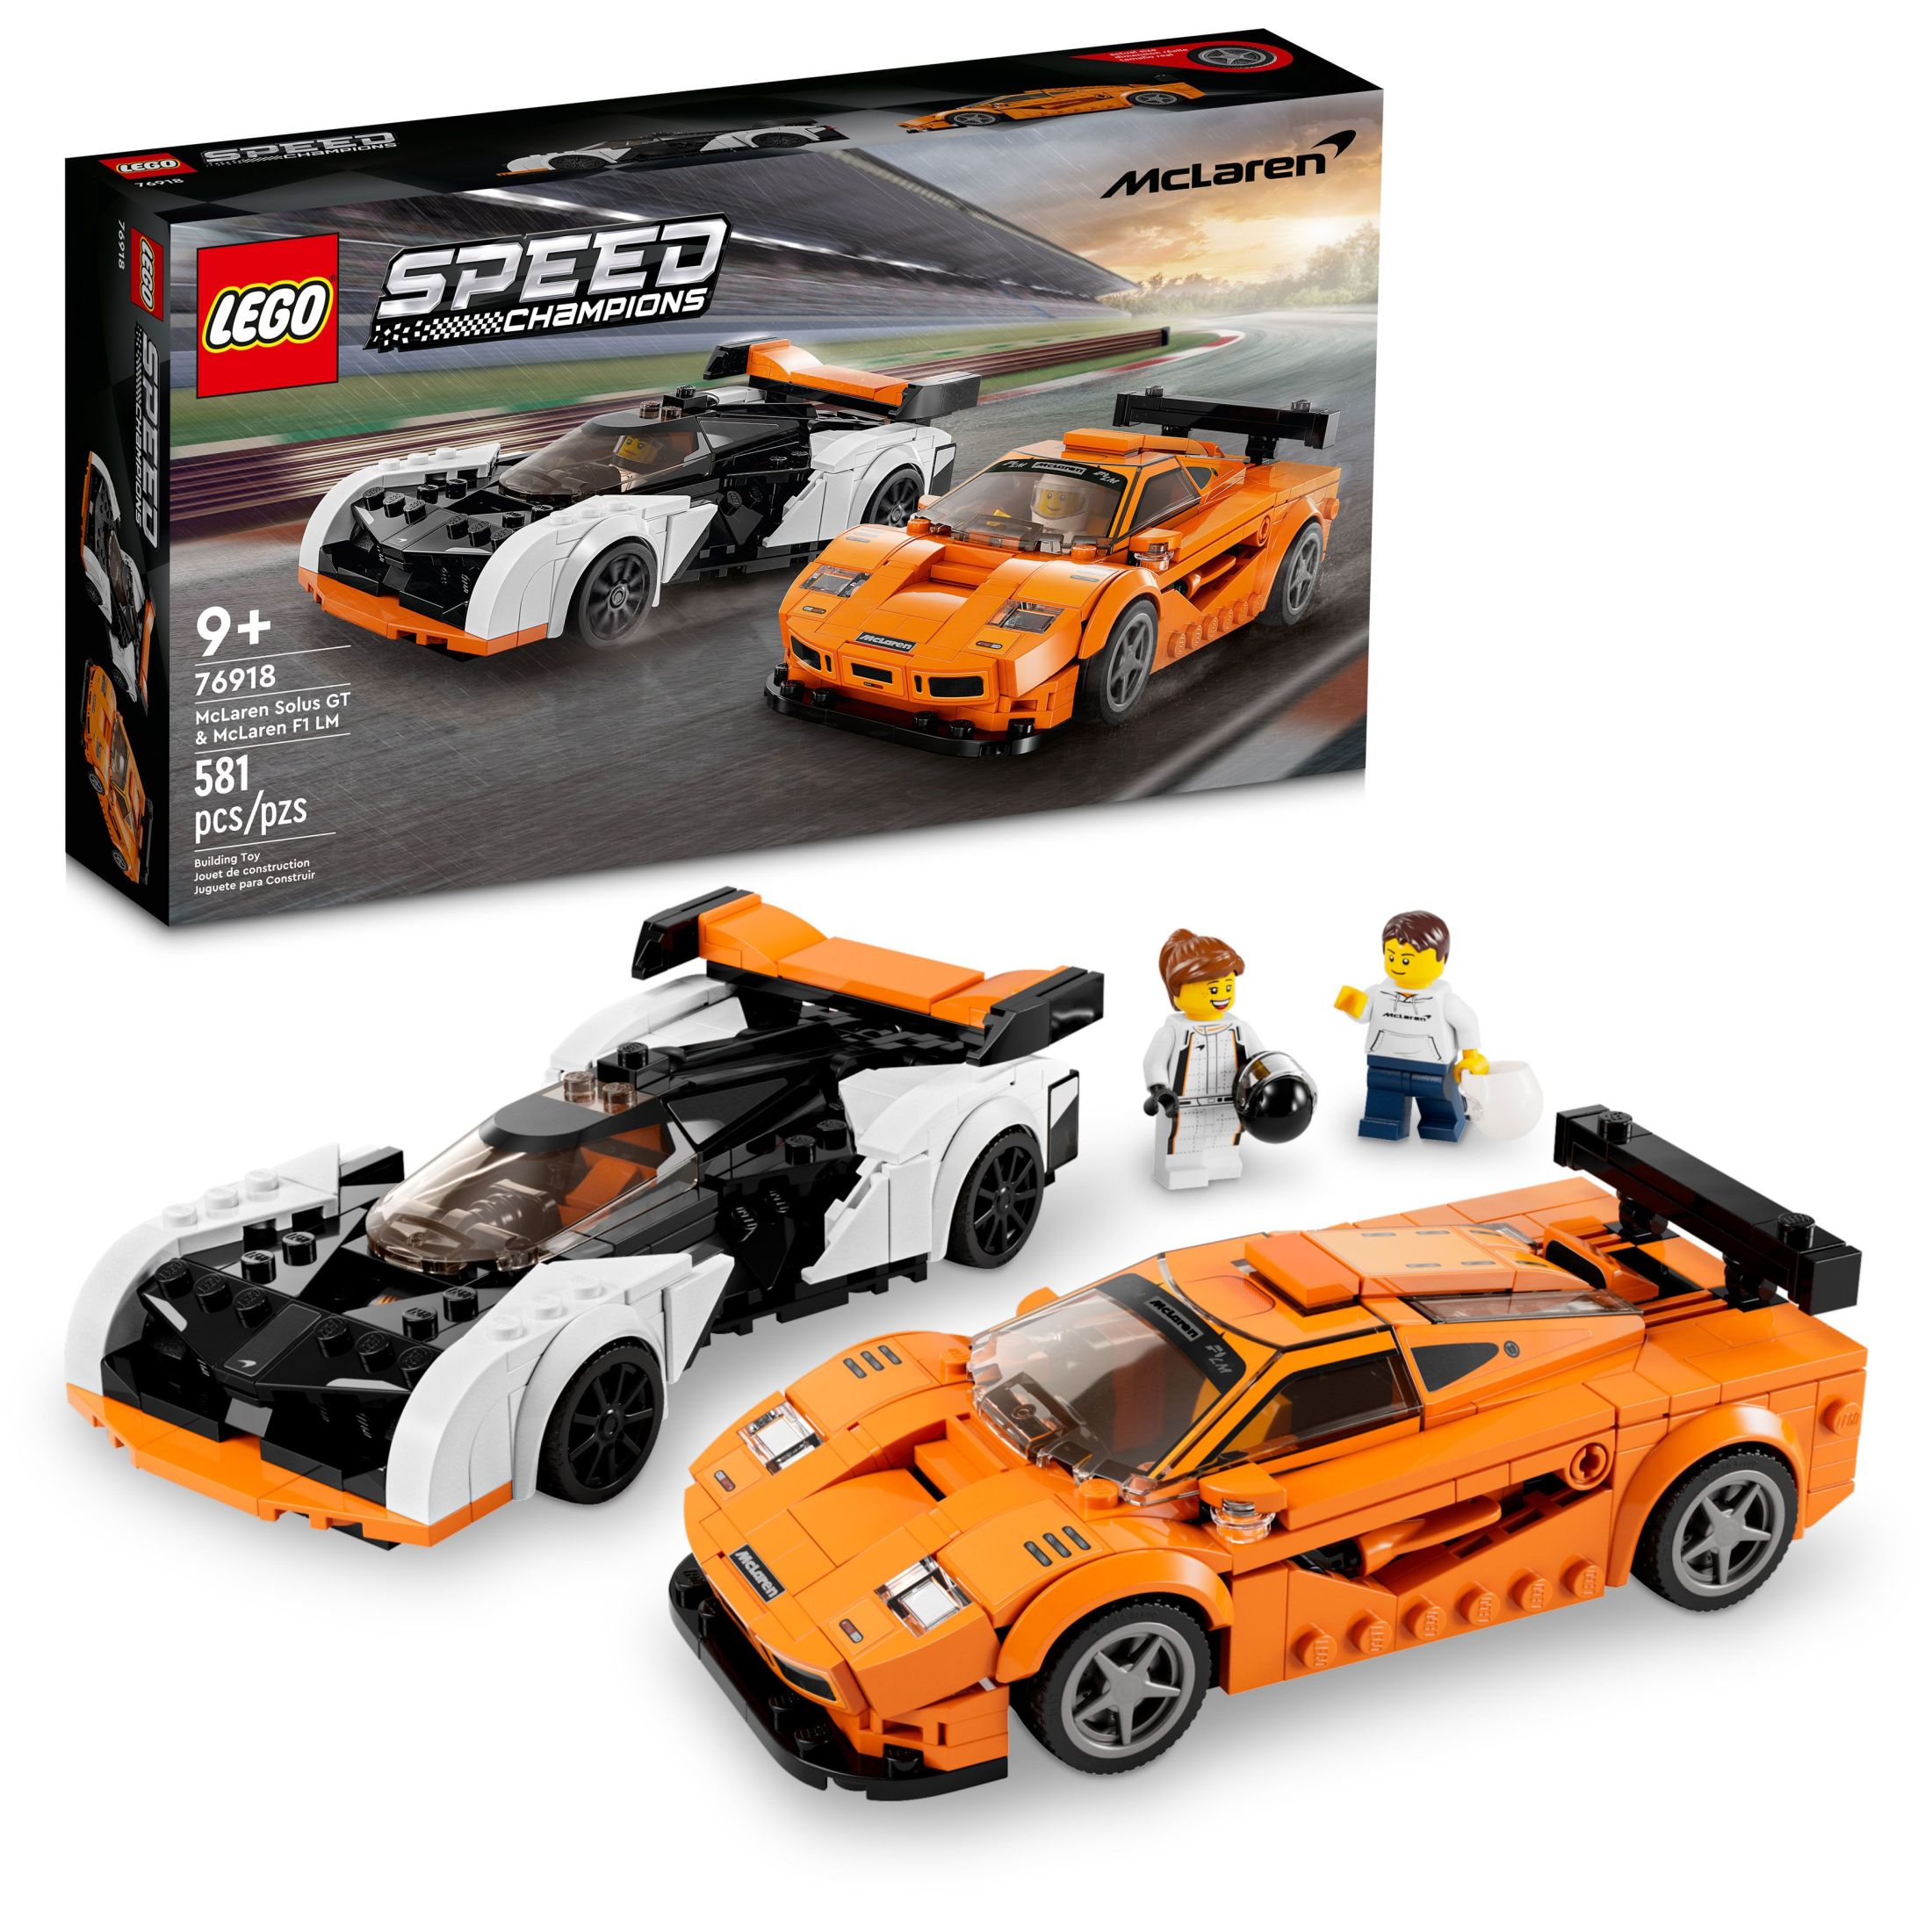 LEGO Speed Champions McLaren Solus GT & McLaren F1 LM 76918 , Featuring 2 Iconic Race Car Toys, Hypercar Model Building Kit, Collectible 2023 Set, Great Kid-Friendly Gift for Boys and Girls Ages 9+ - image 1 of 9